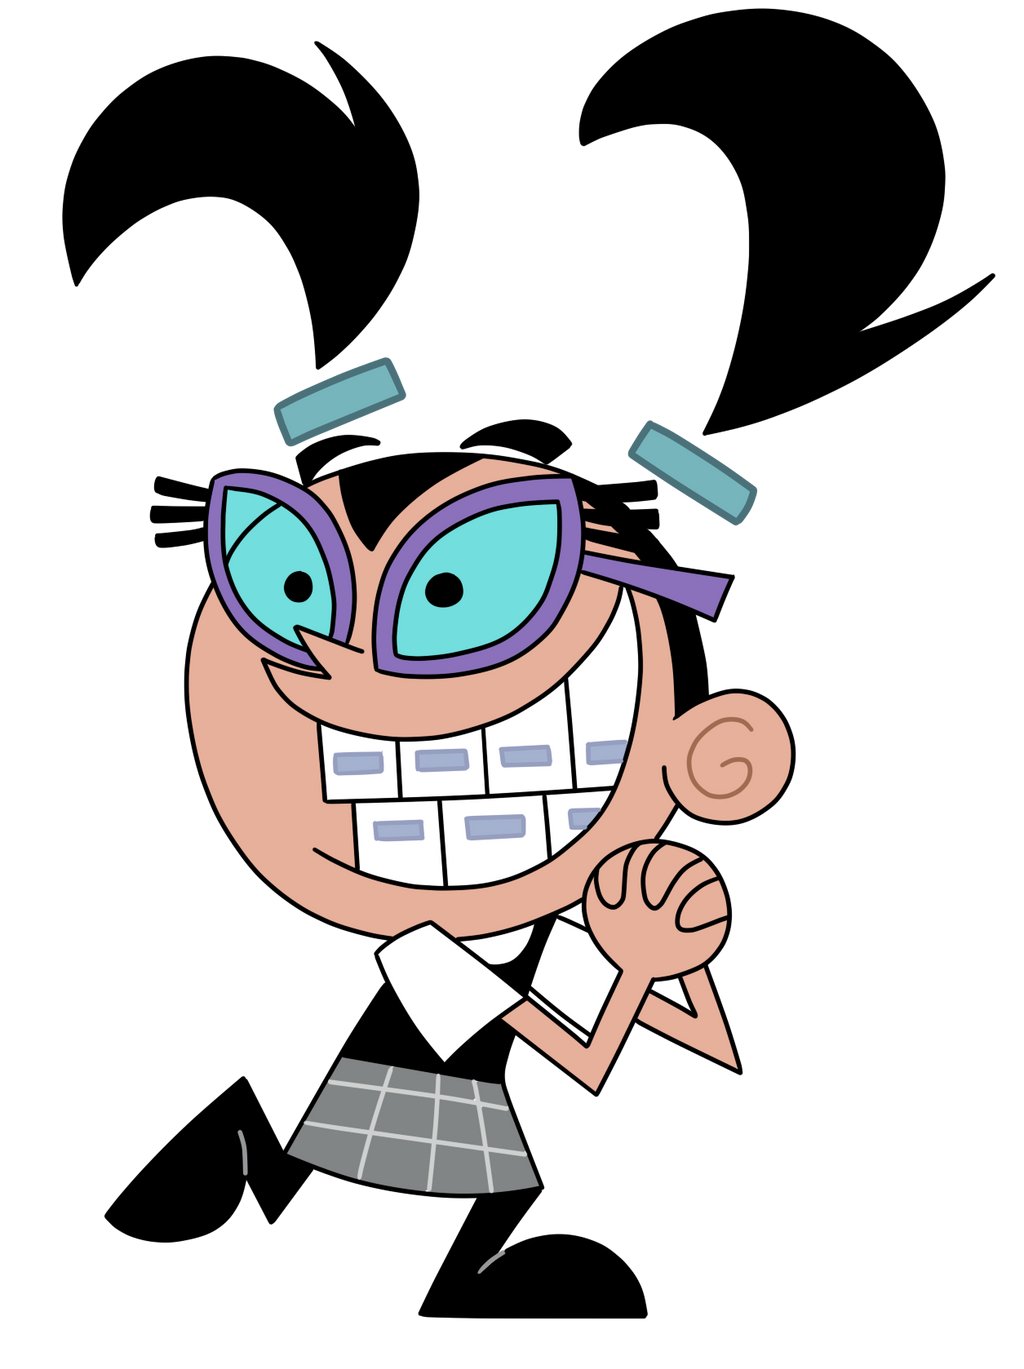 Gallery of Fairly Oddparents By Kuki4982 On Deviantart.